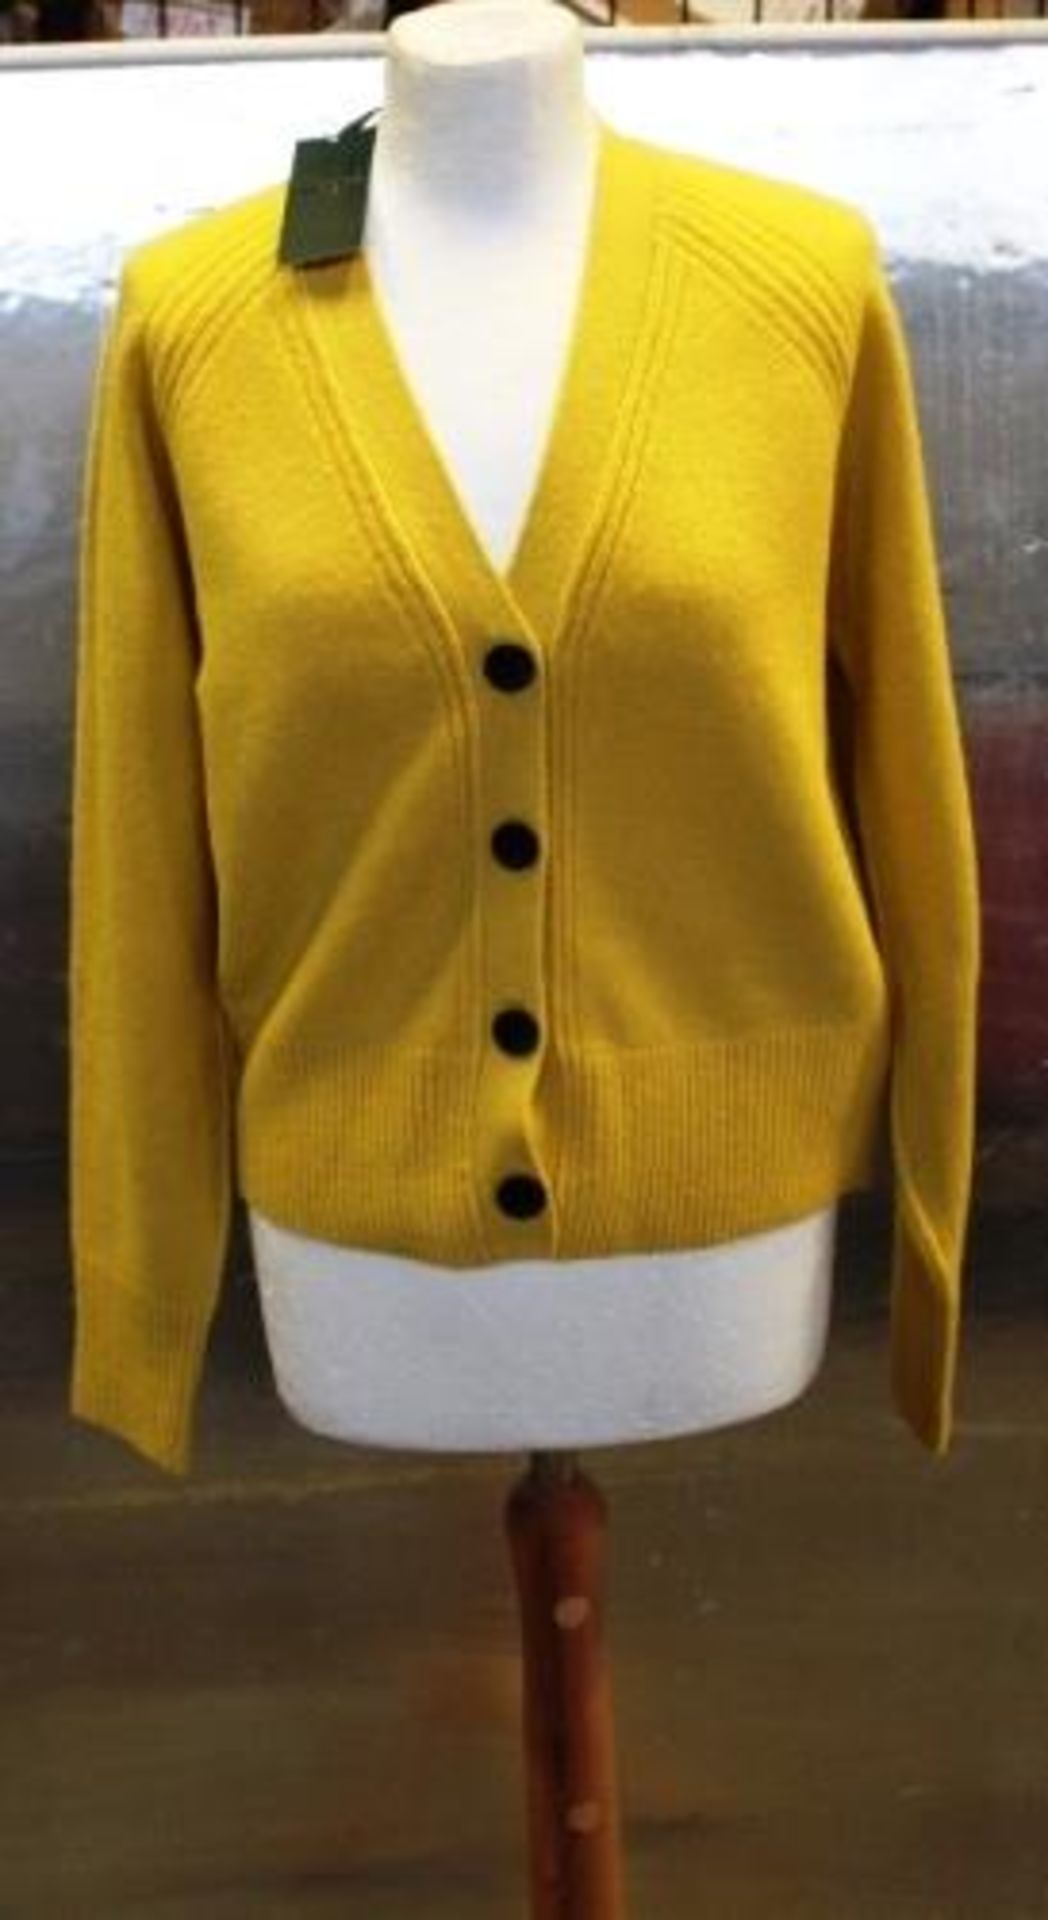 1 x Hobbs Chloe corn yellow cardigan, size L, RRP £99.00 - New with tags (ES16A)